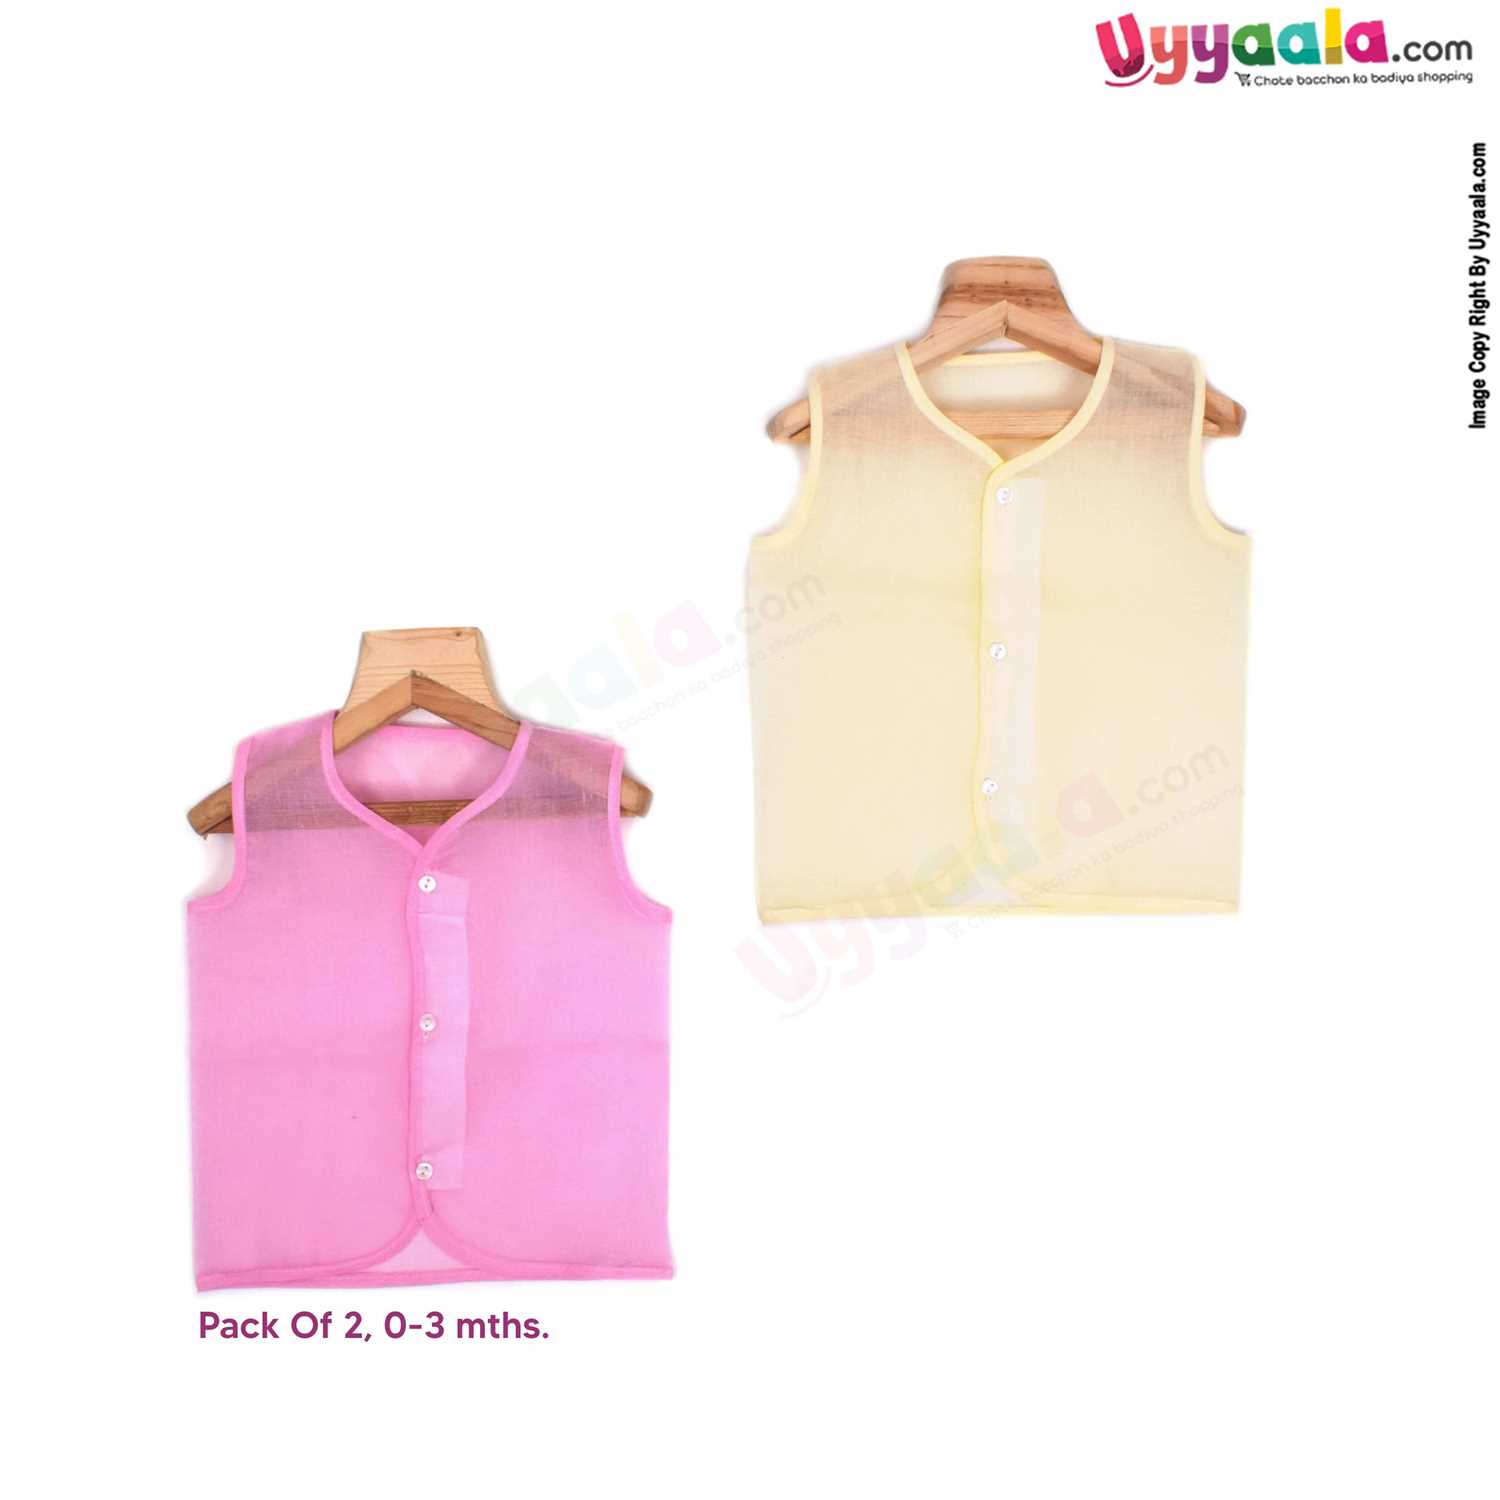 SNUG UP Sleeveless Baby Jabla Set, Front Opening Button Model, Premium Quality Cotton Baby Wear, (0-3M), 2Pack - Pink & Yellow